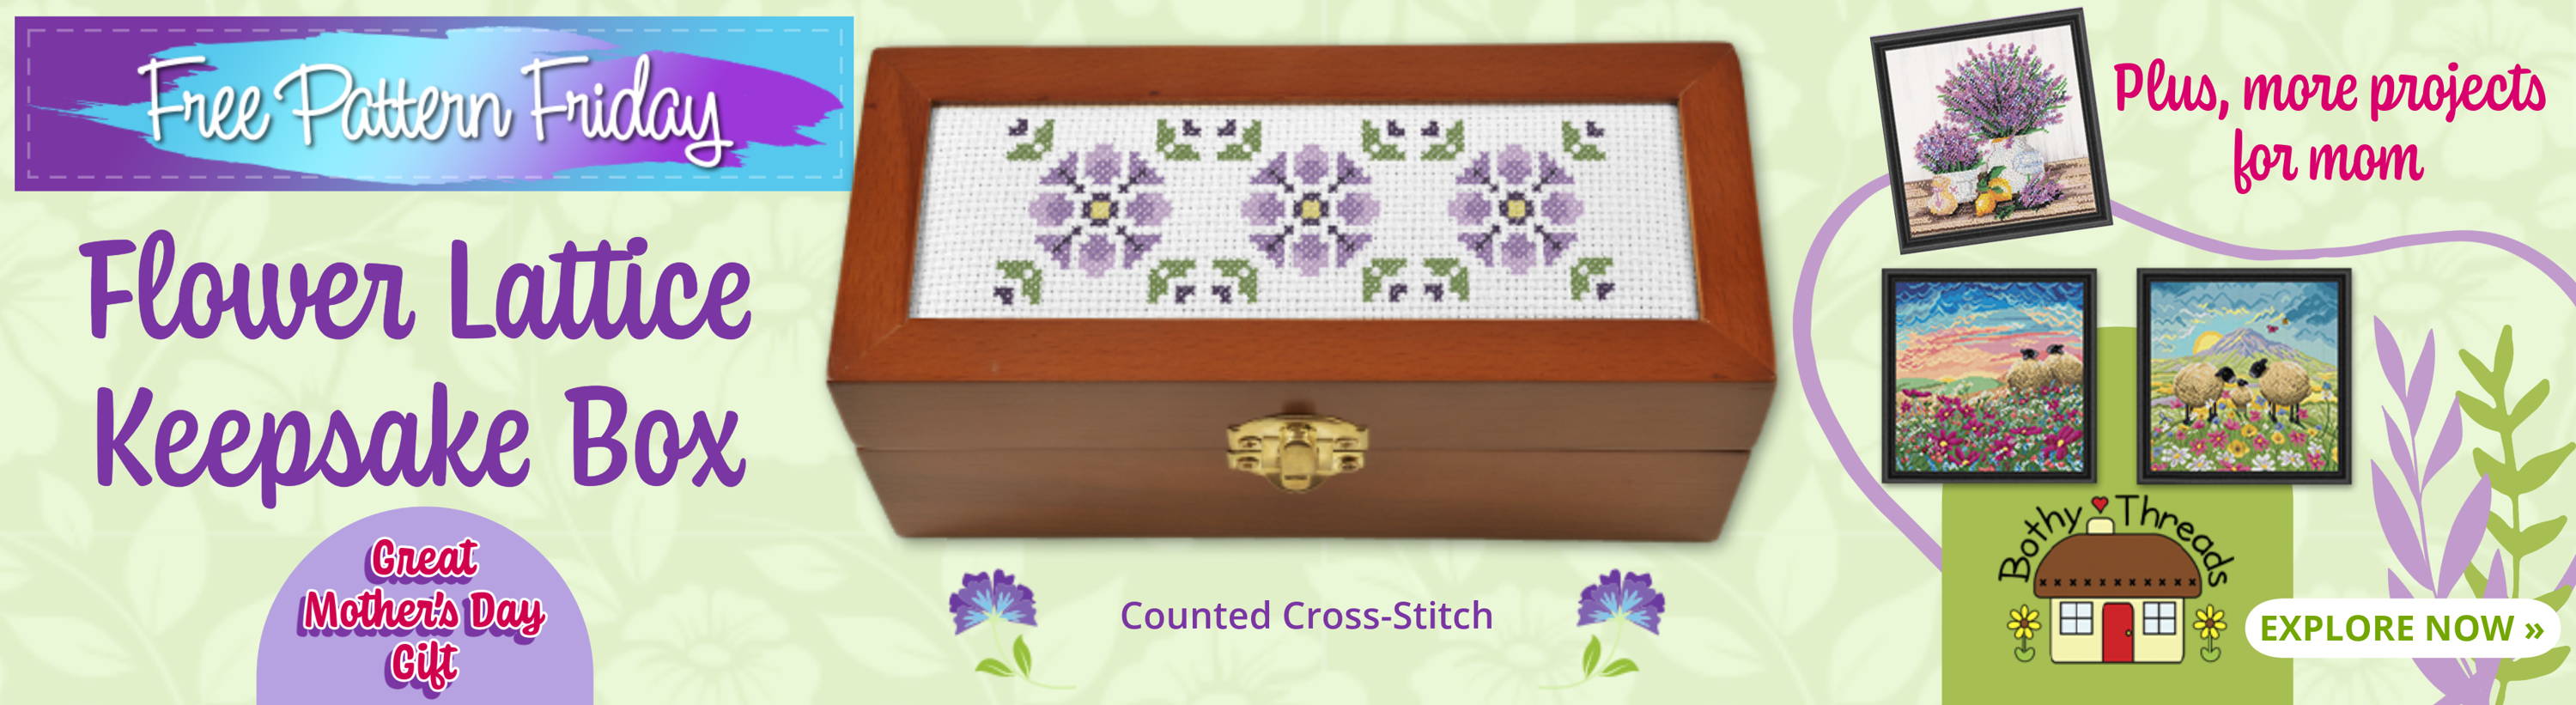 Free Pattern Friday! Floral Lattice Keepsake Box (Counted Cross-Stitch) and more projects for mom, including Bothy threads. Images: Keepsake box and featured needlework.